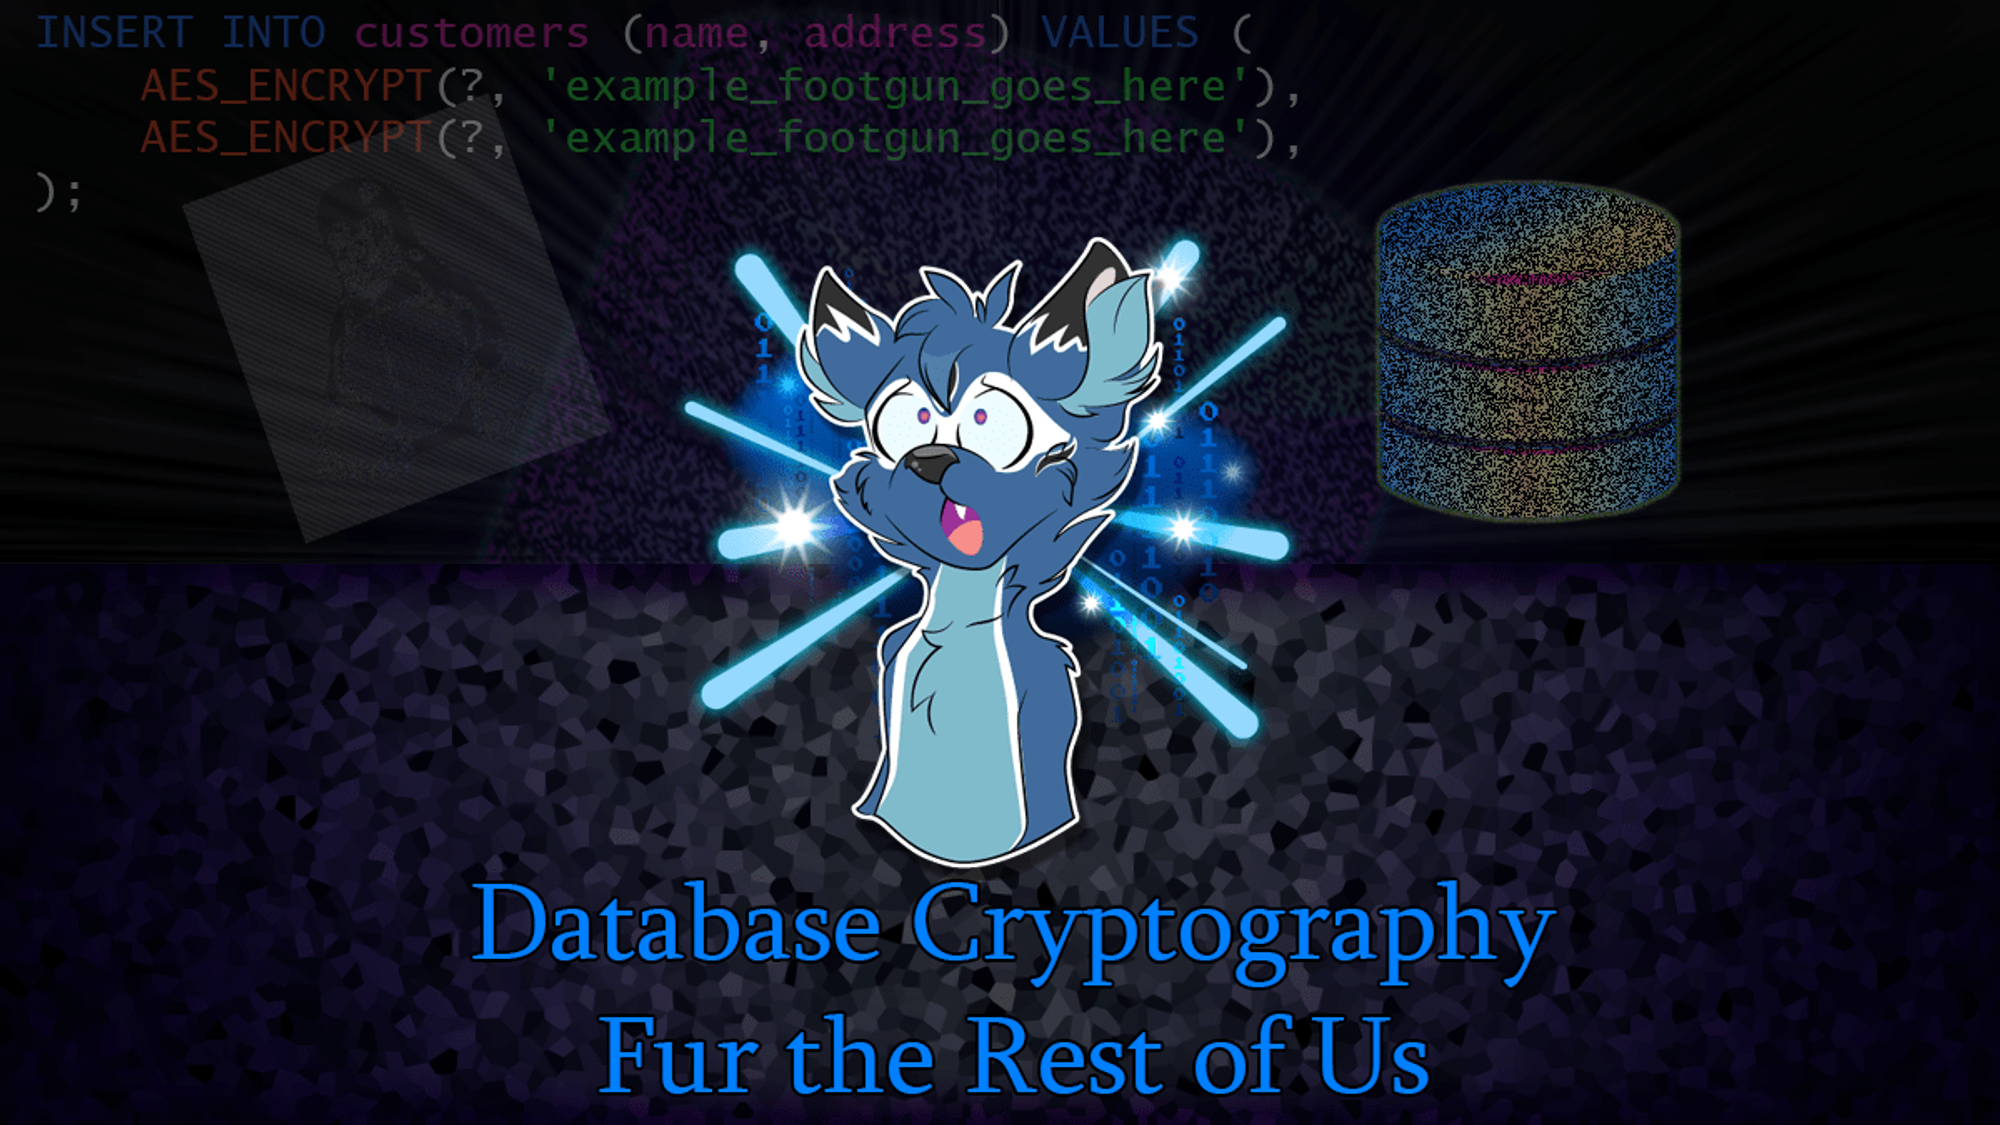 Database Cryptography Fur the Rest of Us - Dhole Moments